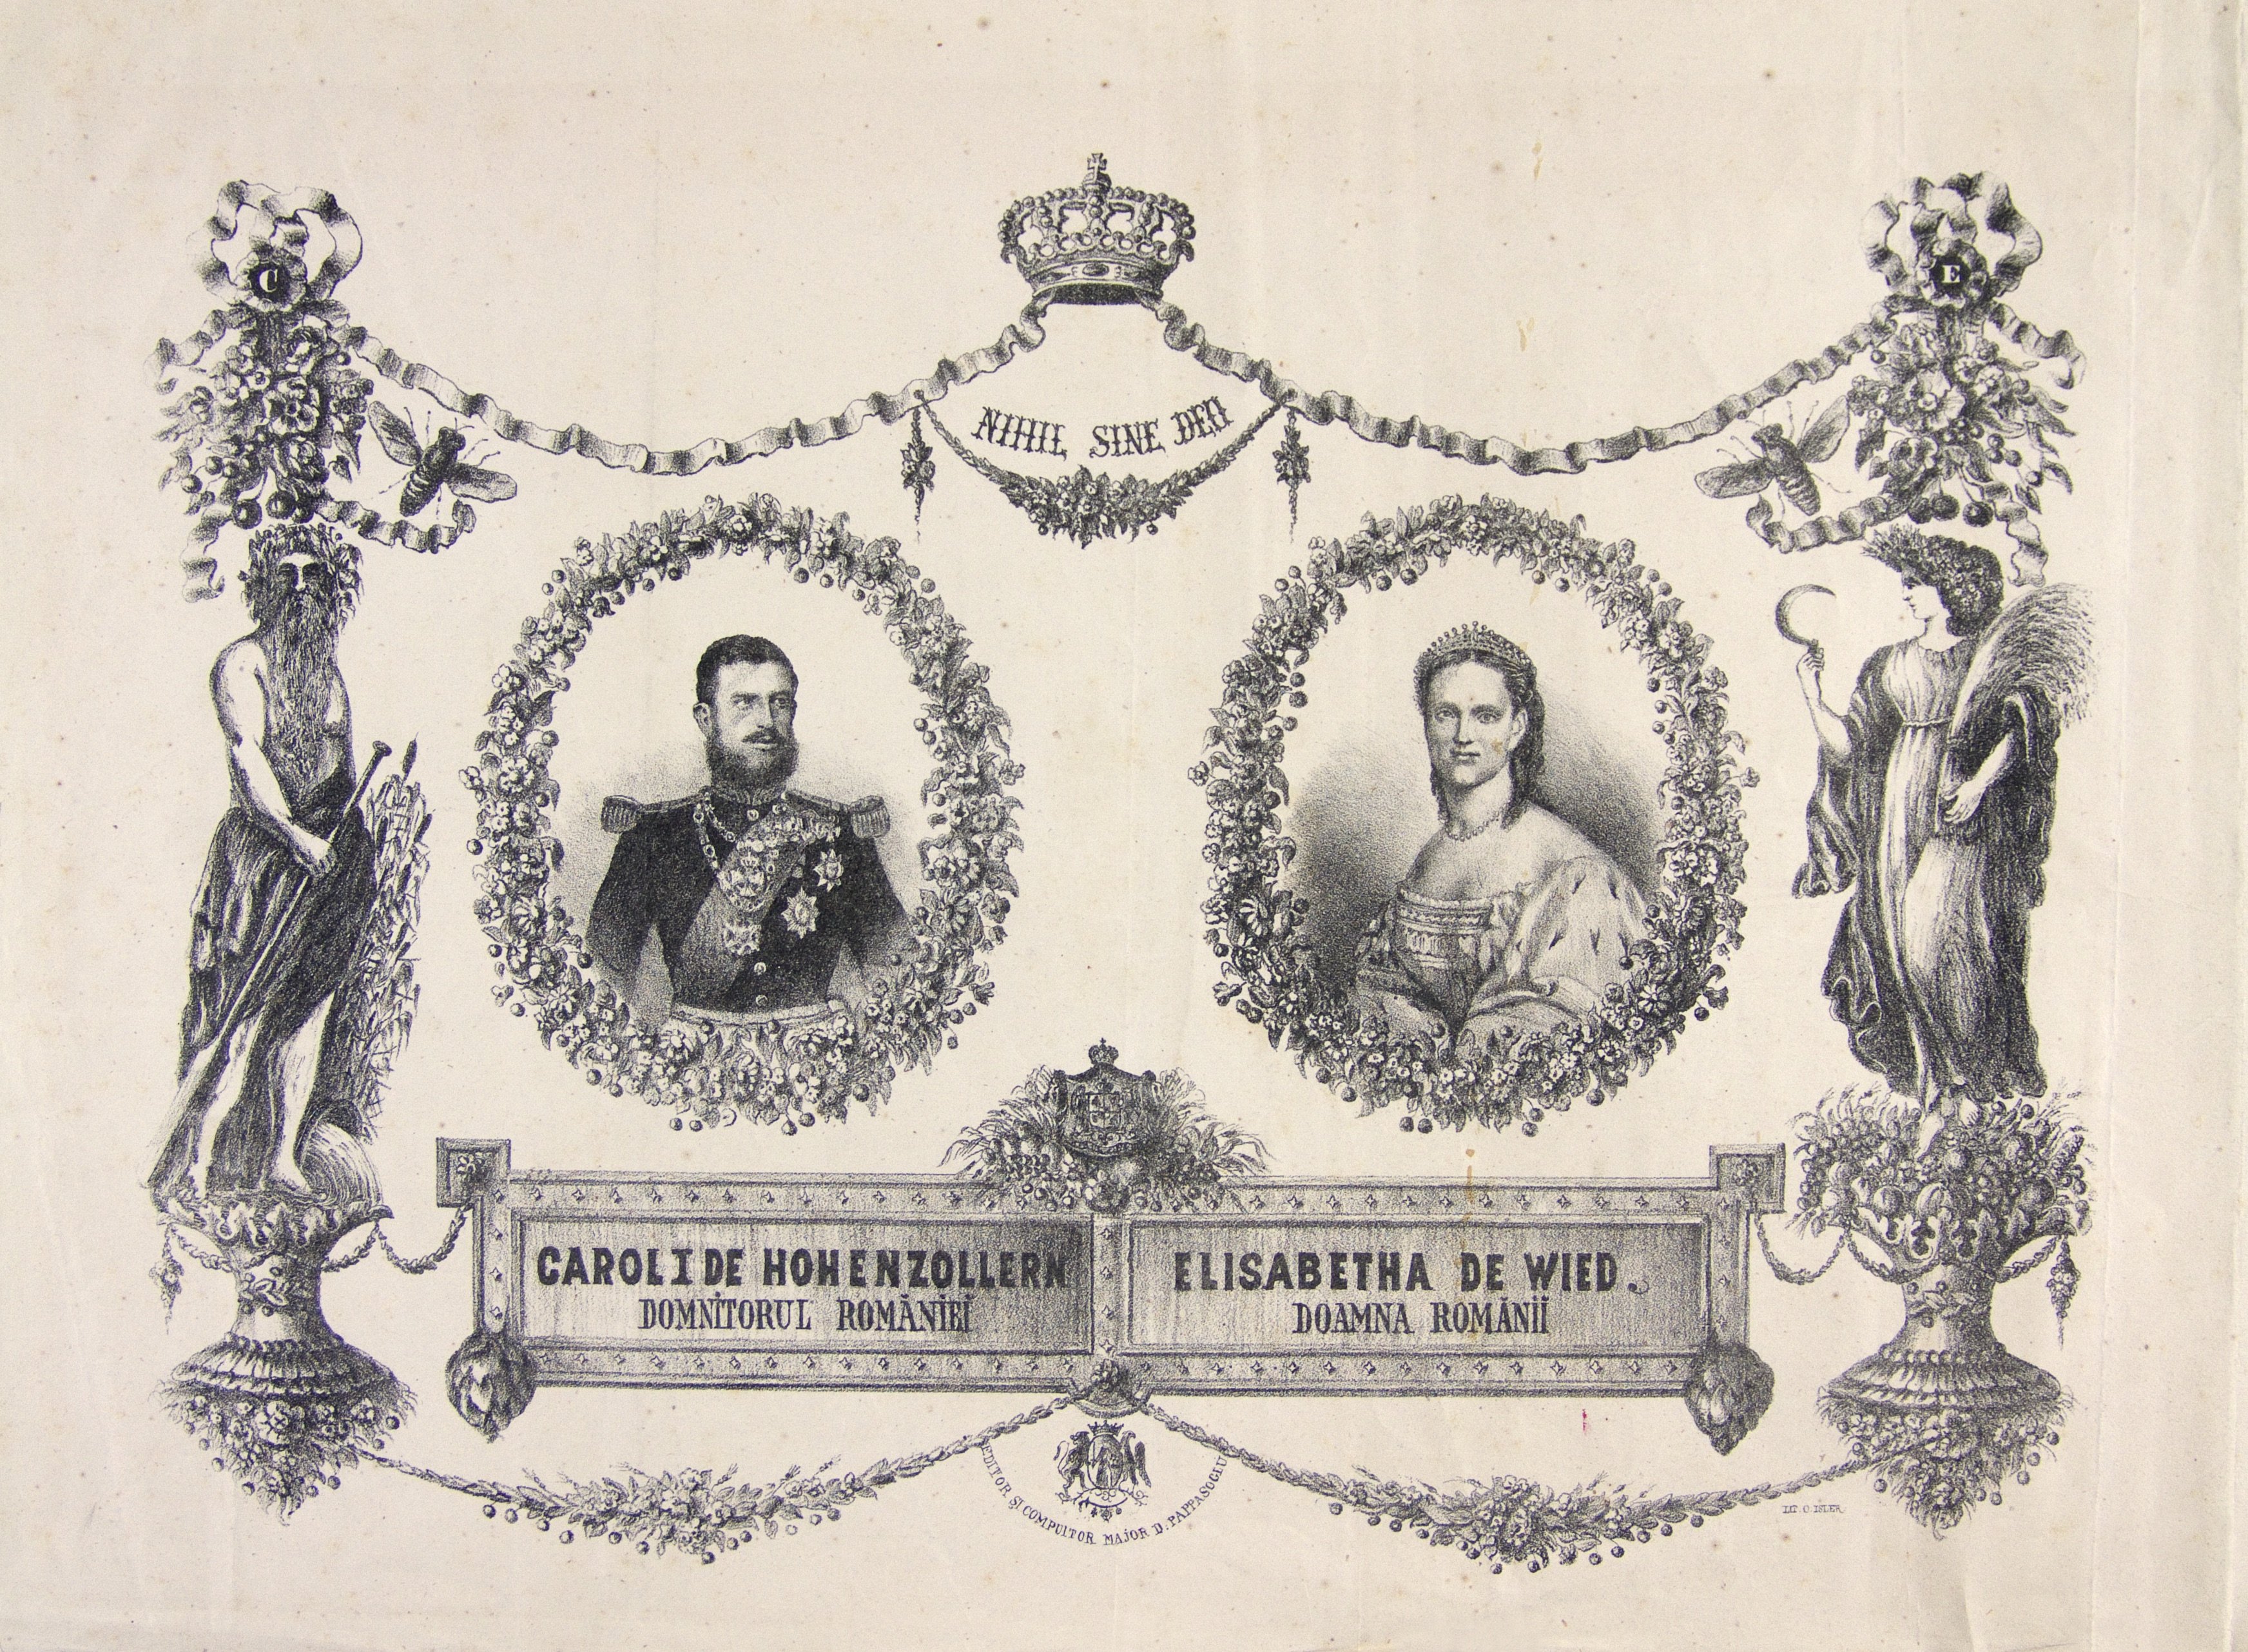 Stamps with portraits of the ruler Carol of Hohenzollern and his wife Elisabeth de Wied - well known by her literary name of Carmen Sylva (National Archives of Romania, Bucharest, collection Stamps_472).